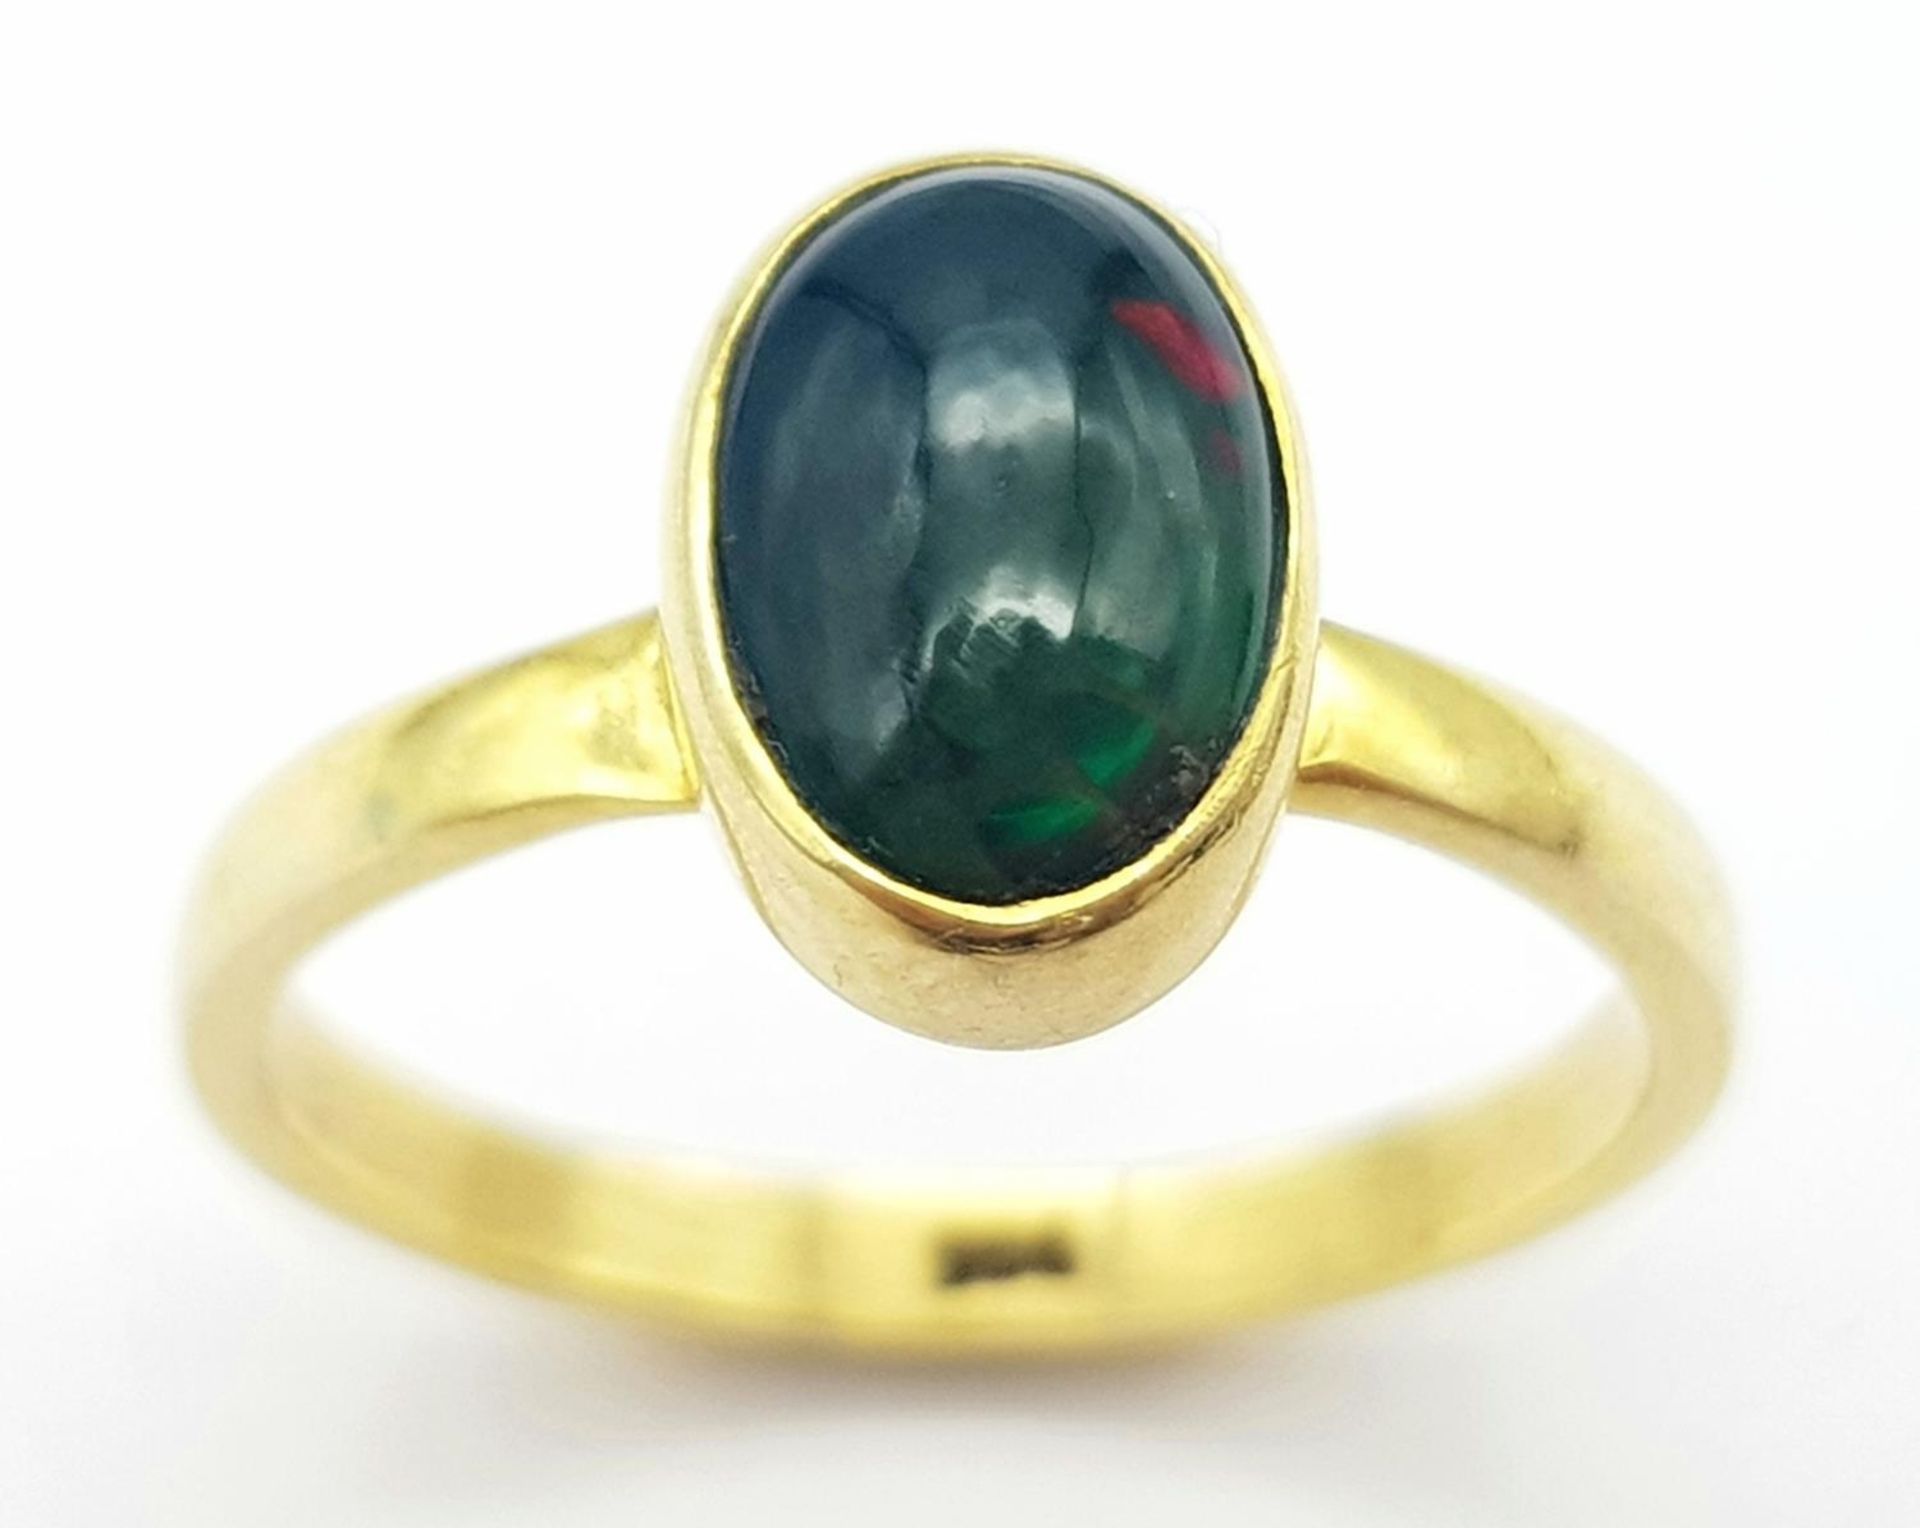 A Black Opal Gilded 925 Silver Ring. Size M/N, 2.1g total weight.